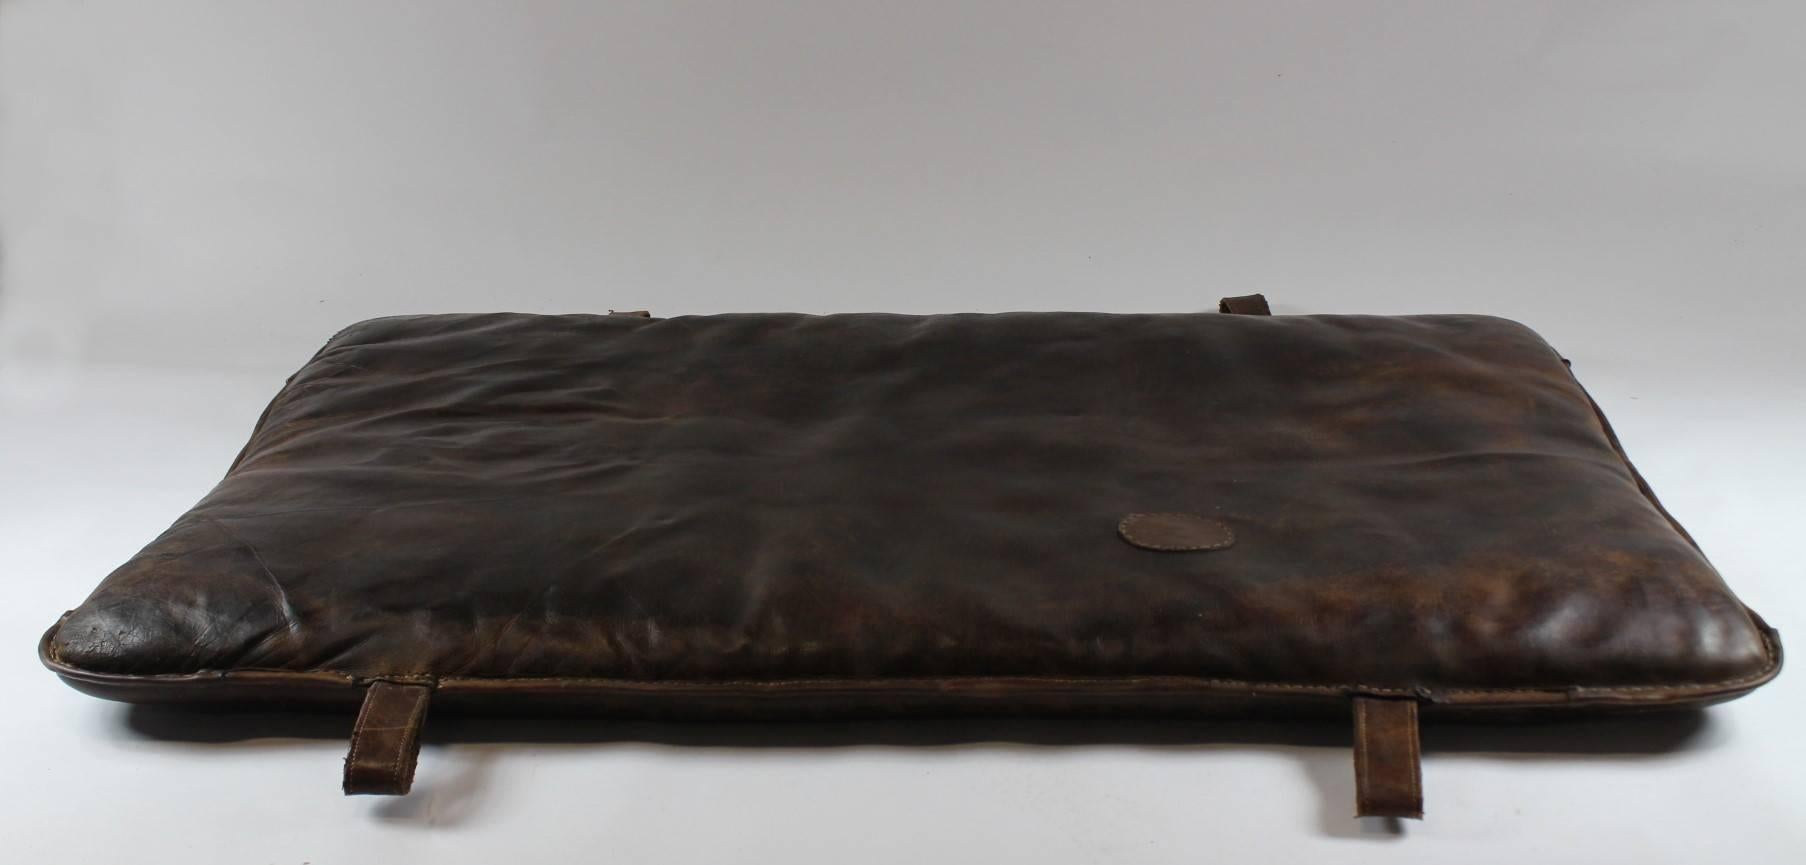 Leather gym mat from the 1930s. One leather patch made from old leather. Nice patina.